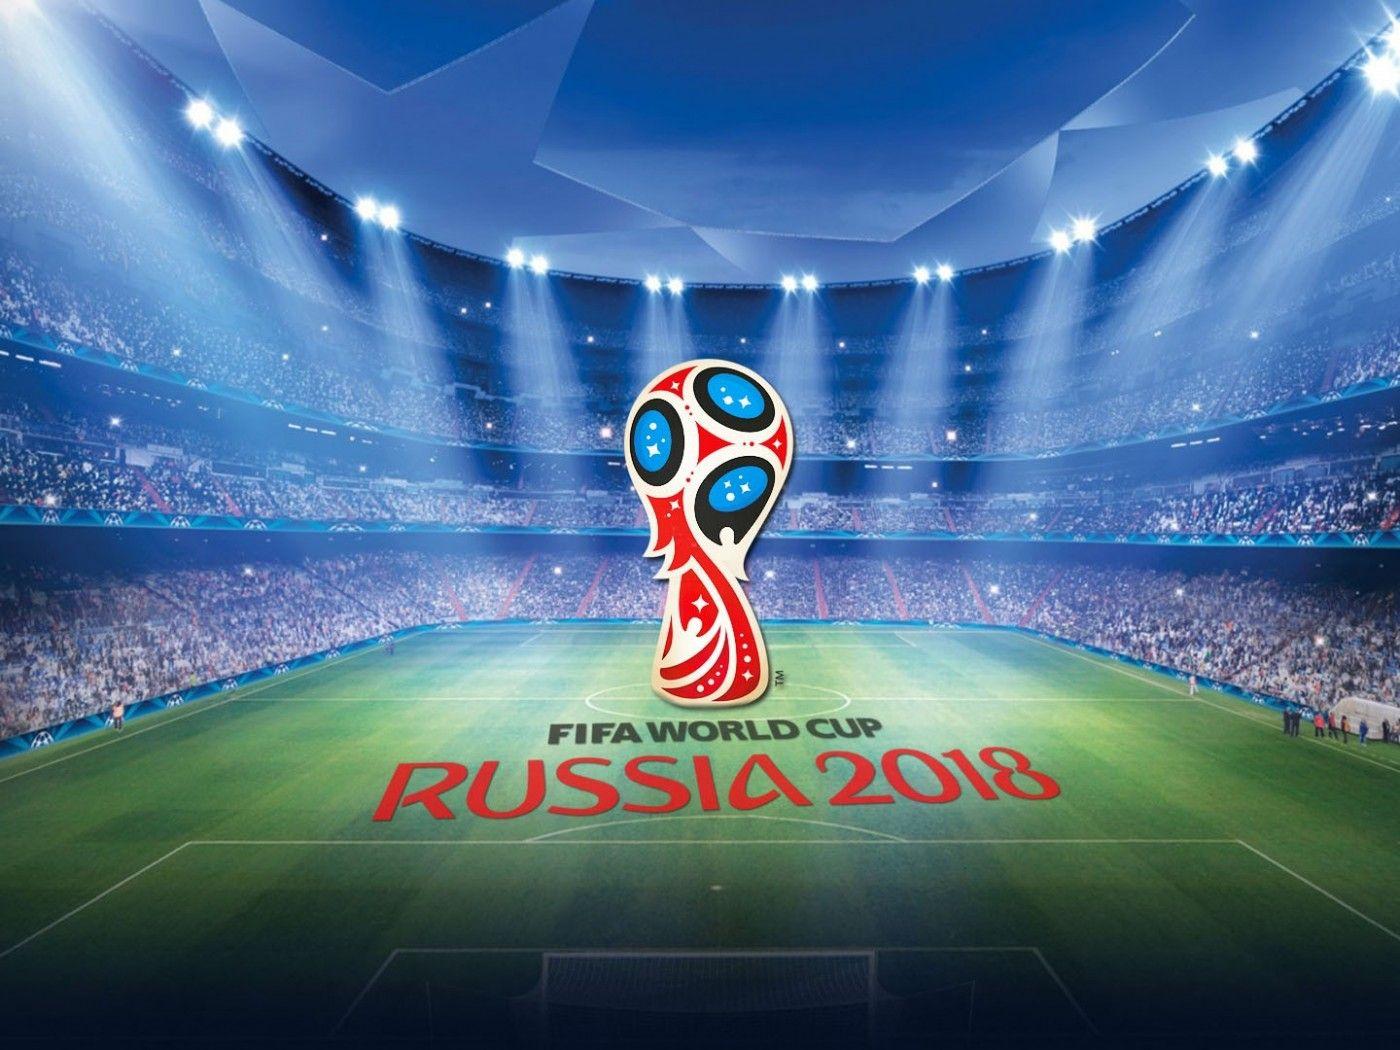 FIFA World Cup HQ Background Wallpaper 34006